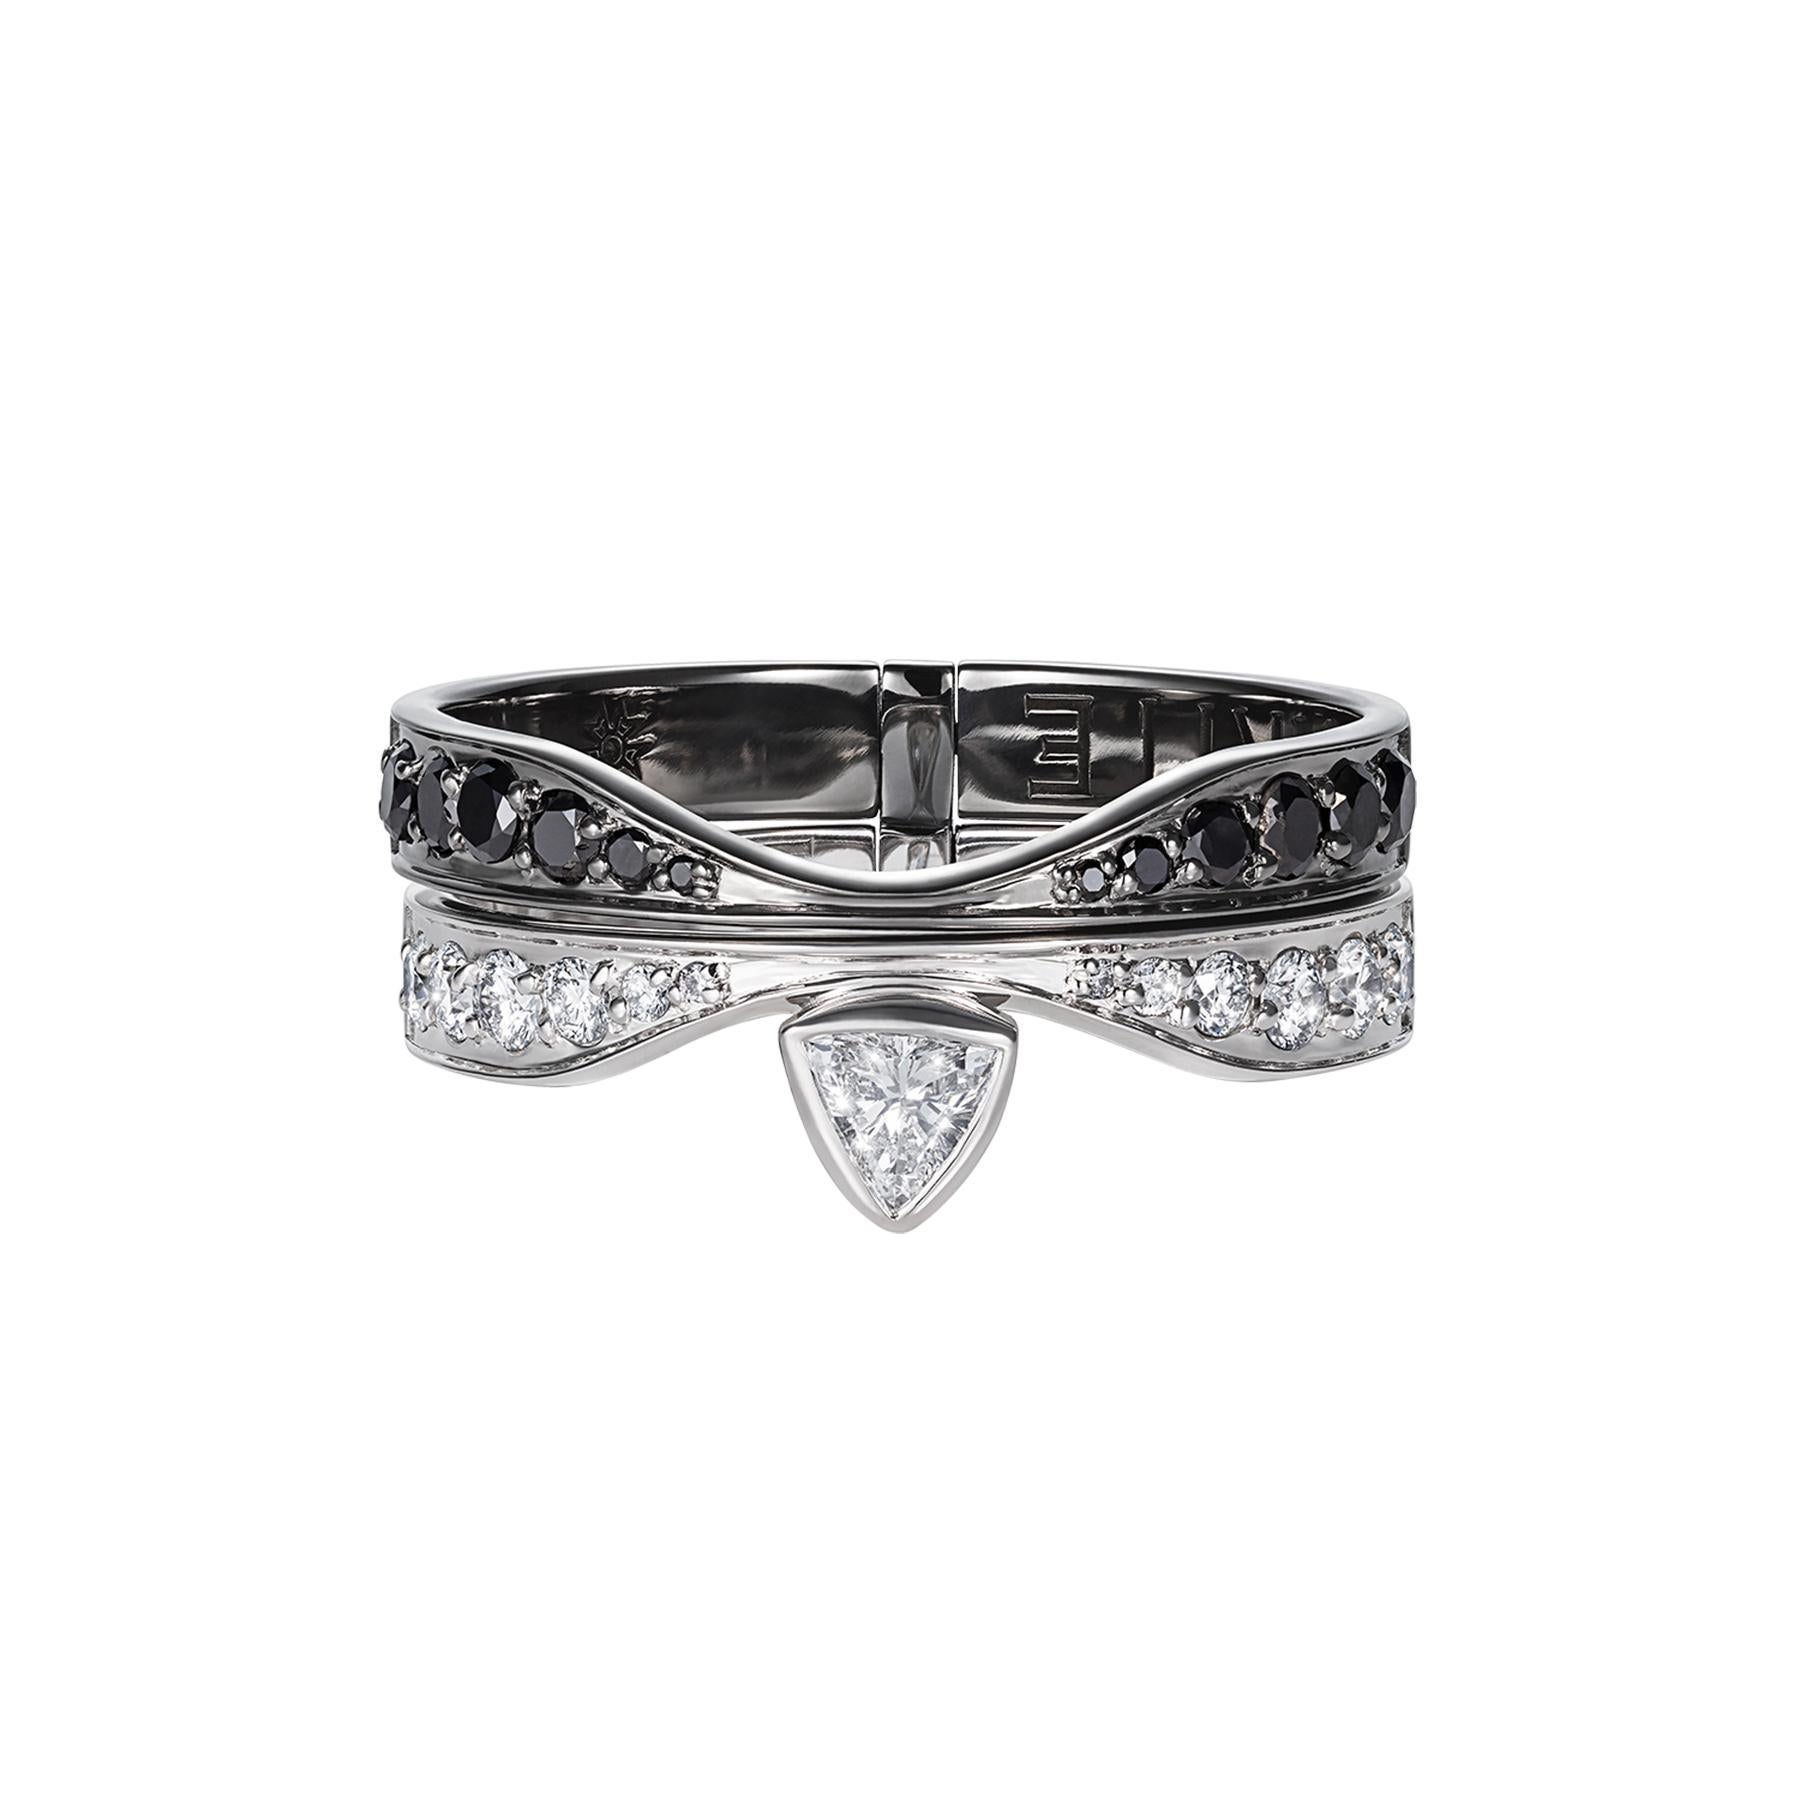 The transformer ring has two positions and can be used as a wedding ring.
The first position features a triangular diamond nestled between the row of white and black diamonds. The second, a triangular diamond below the row of white and black